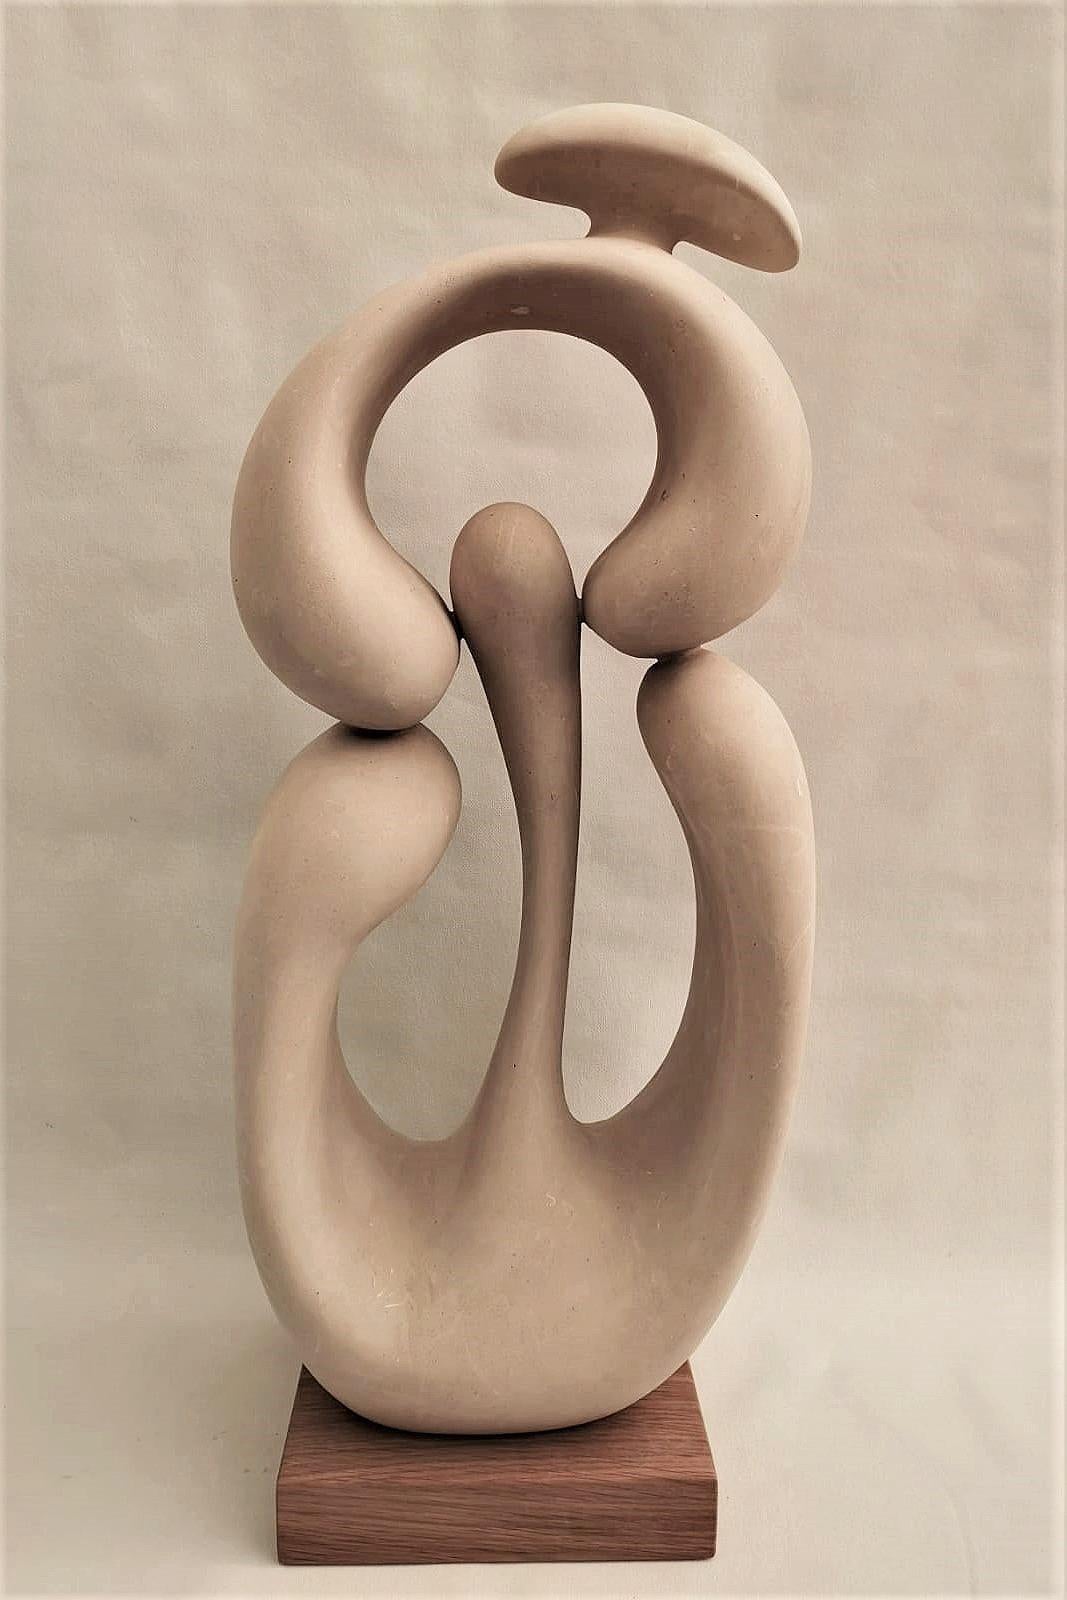 Hand-Carved 21st Century Abstract Sculpture Iloveu by Renzo Buttazzo For Sale